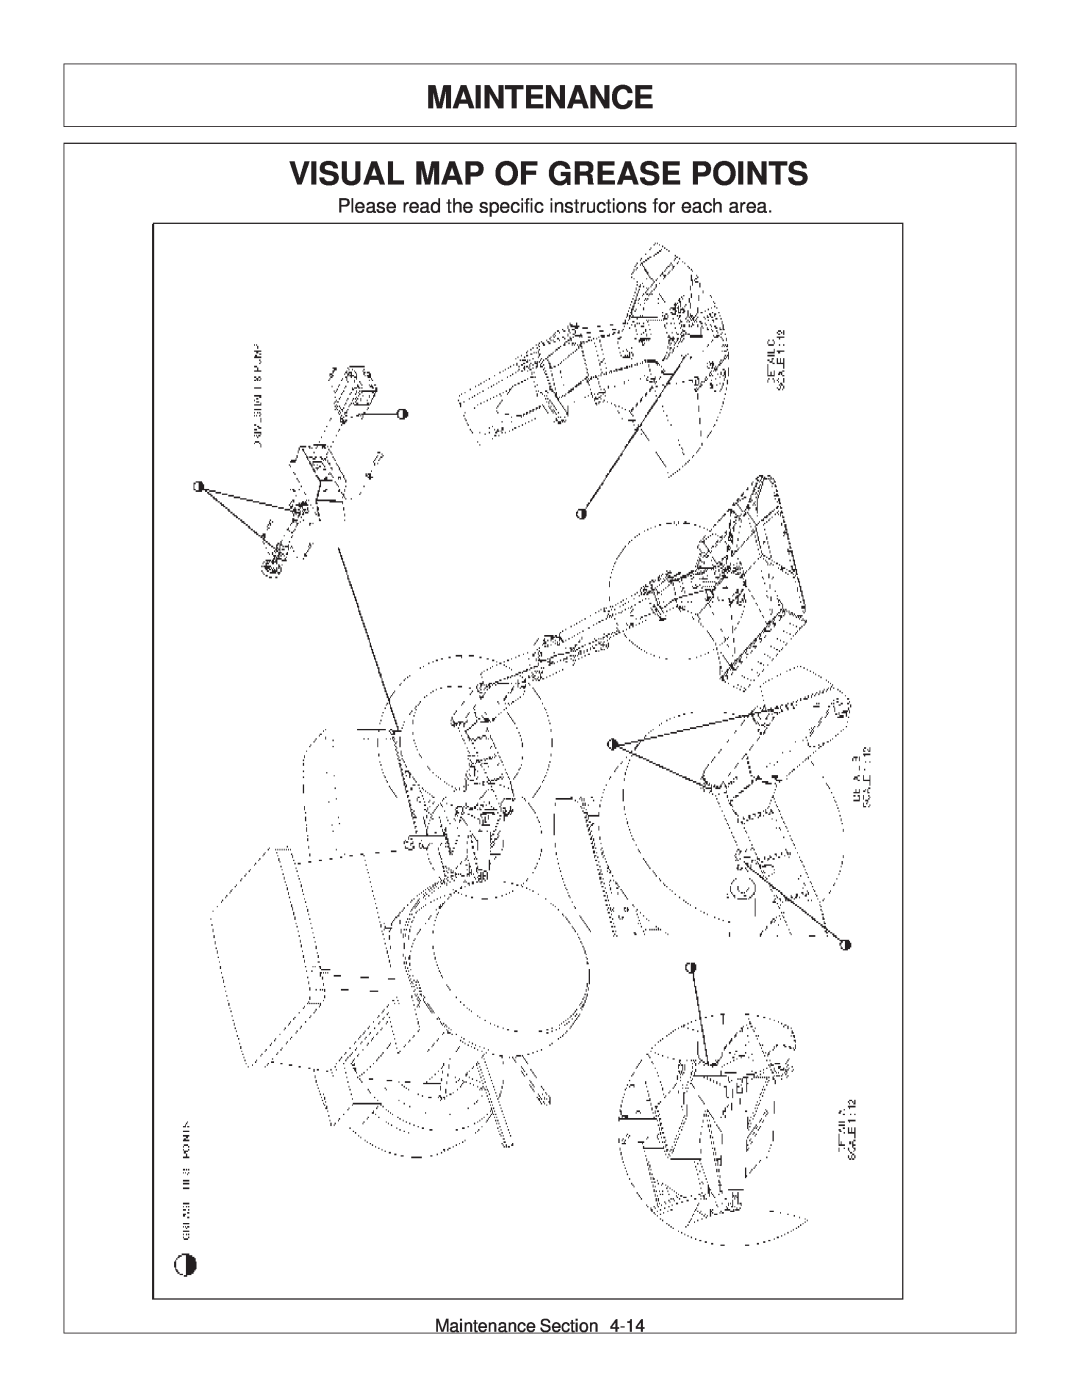 Tiger JD 62-6420 manual Maintenance Visual Map Of Grease Points, Please read the specific instructions for each area 